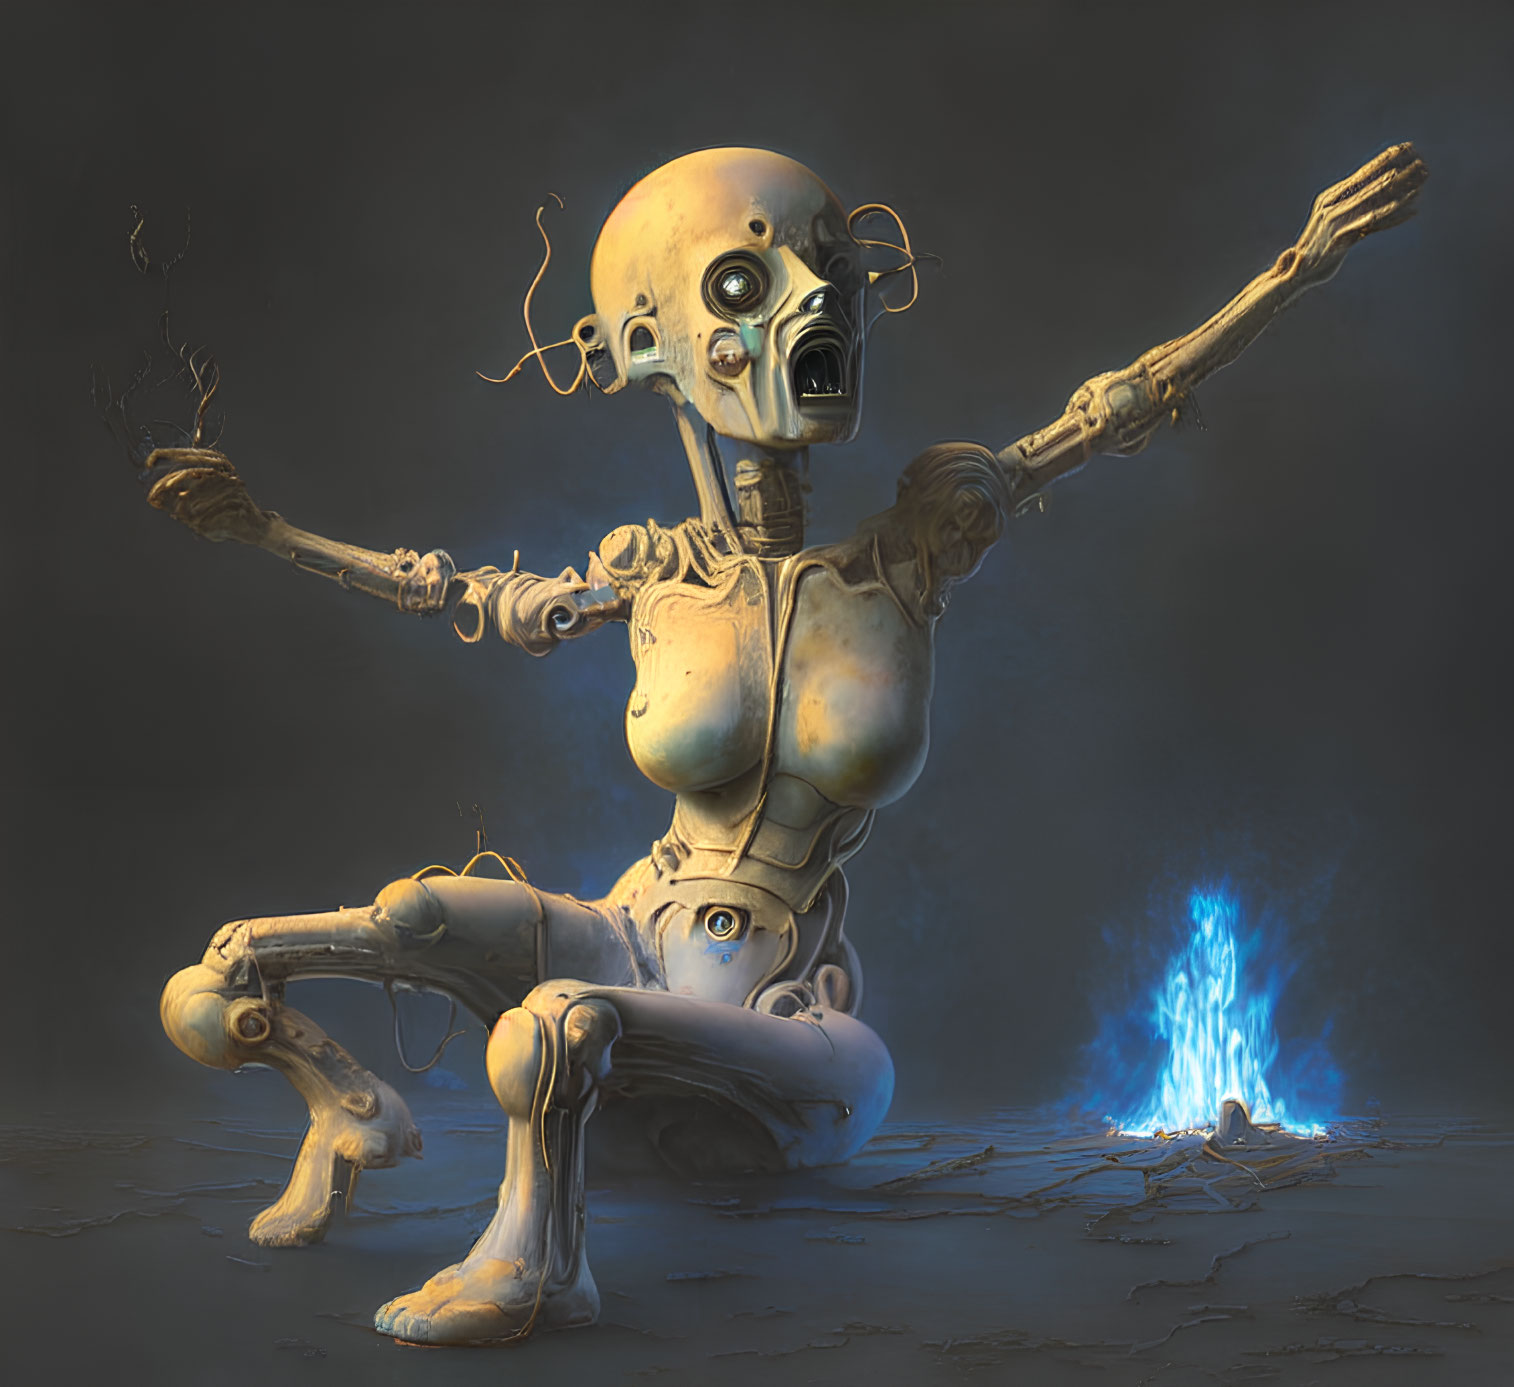 Distressed humanoid robot beside small blue flame in despair